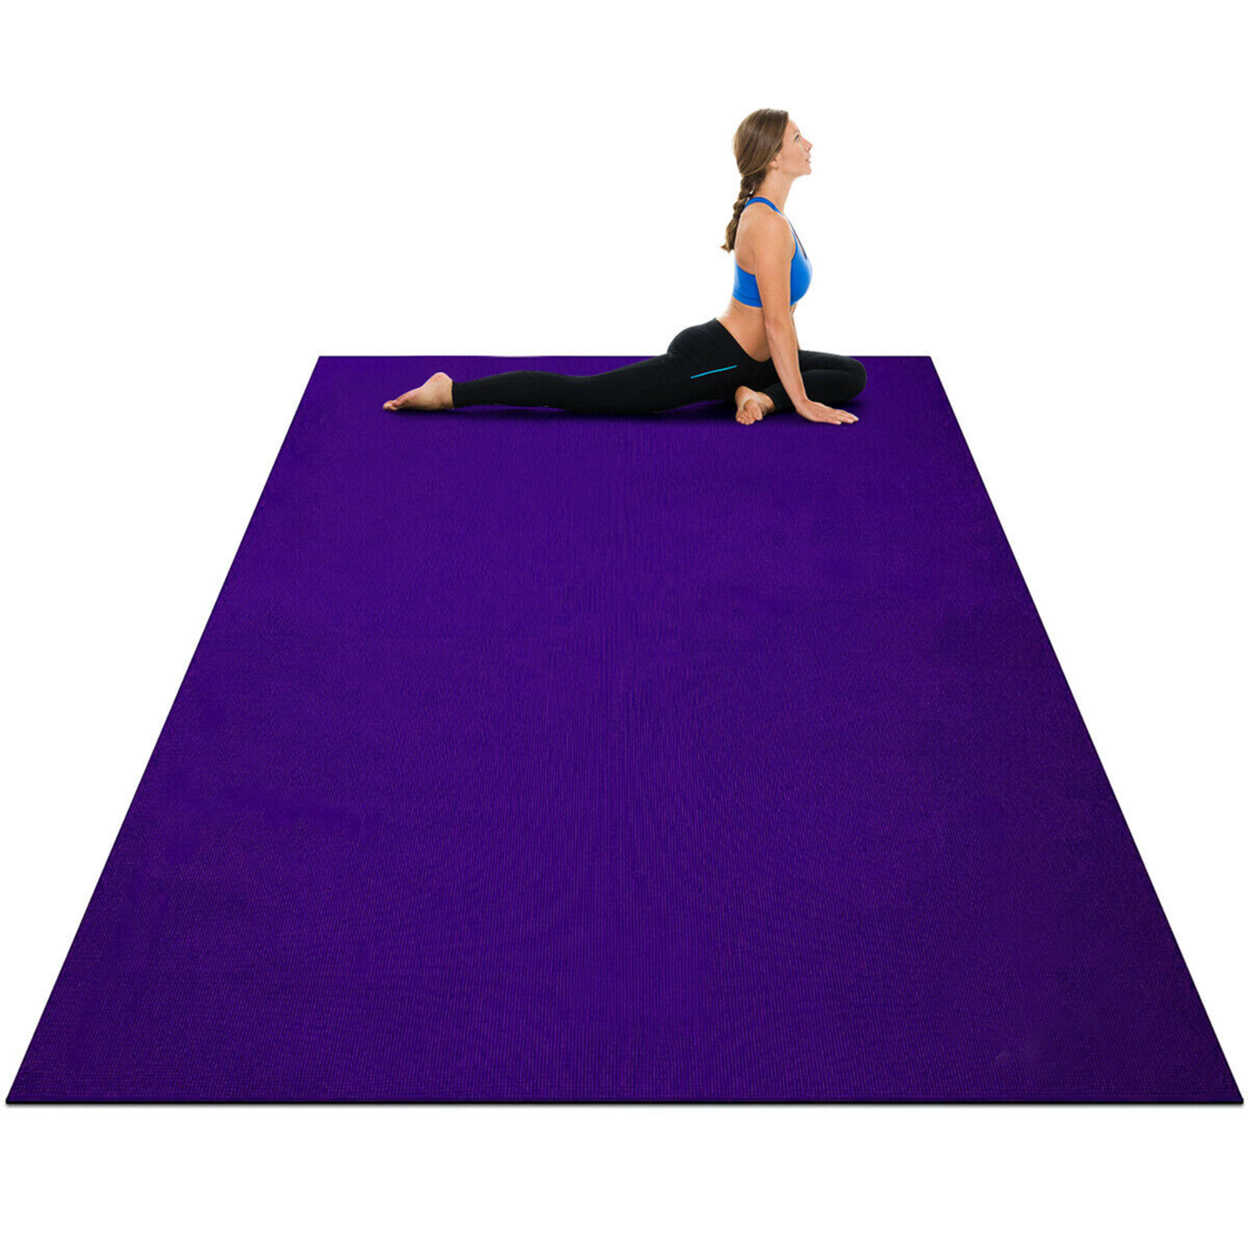 Large Yoga Mat 7' X 5' X 8 Mm Thick Workout Mats For Home Gym Flooring - Purple